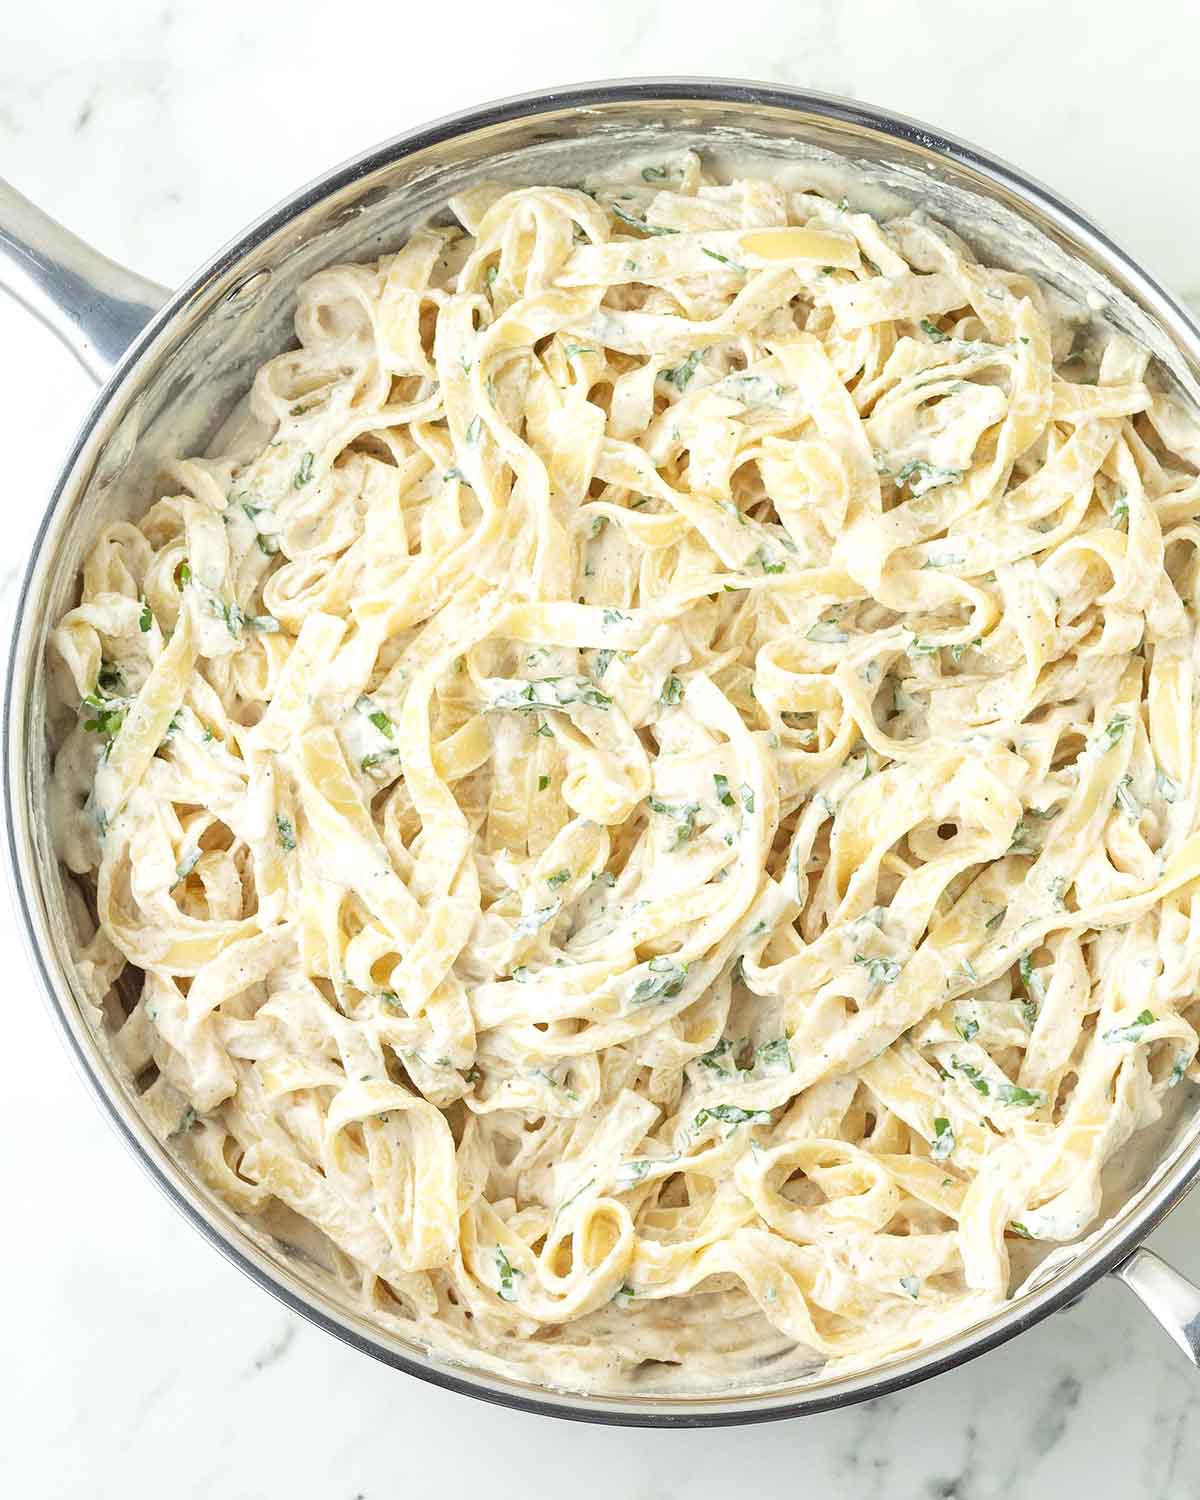 A large stainless-steel pan of freshly made tahini noodles, the pasta is garnished with fresh parsley.